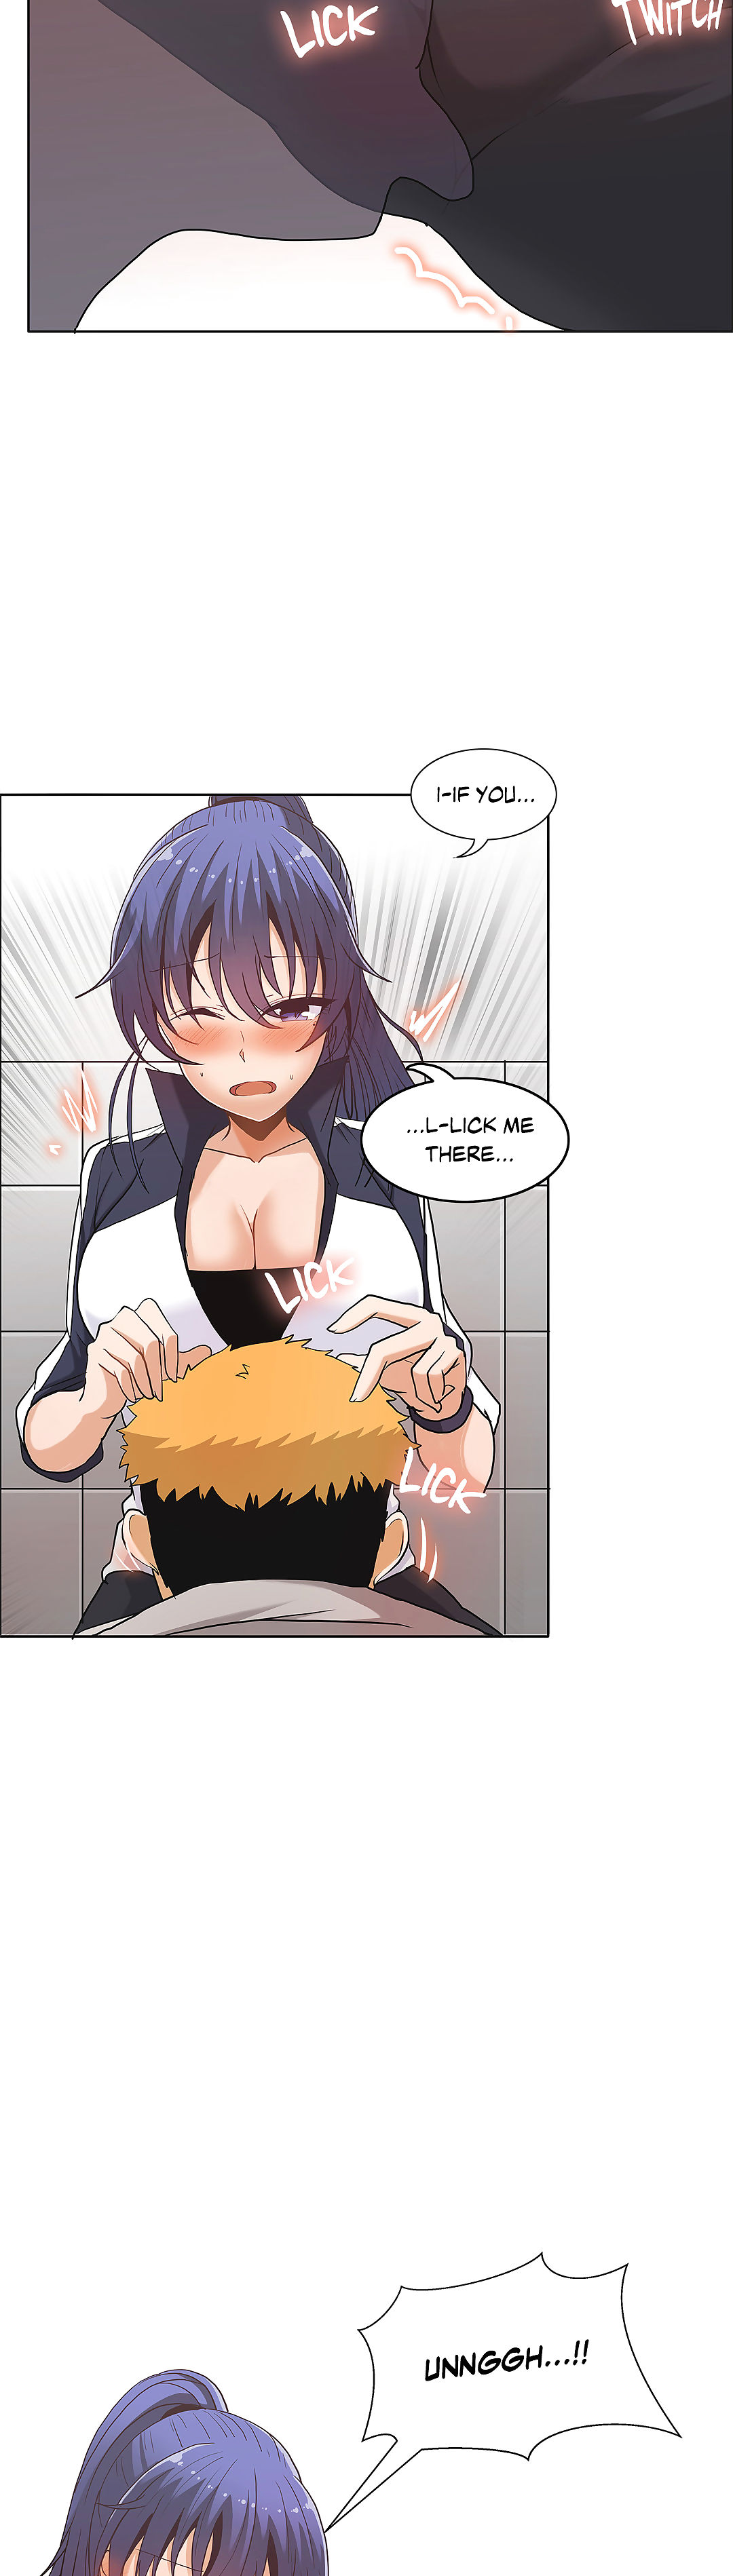 The Girl That Wet the Wall Ch 11 - 40 - part 3